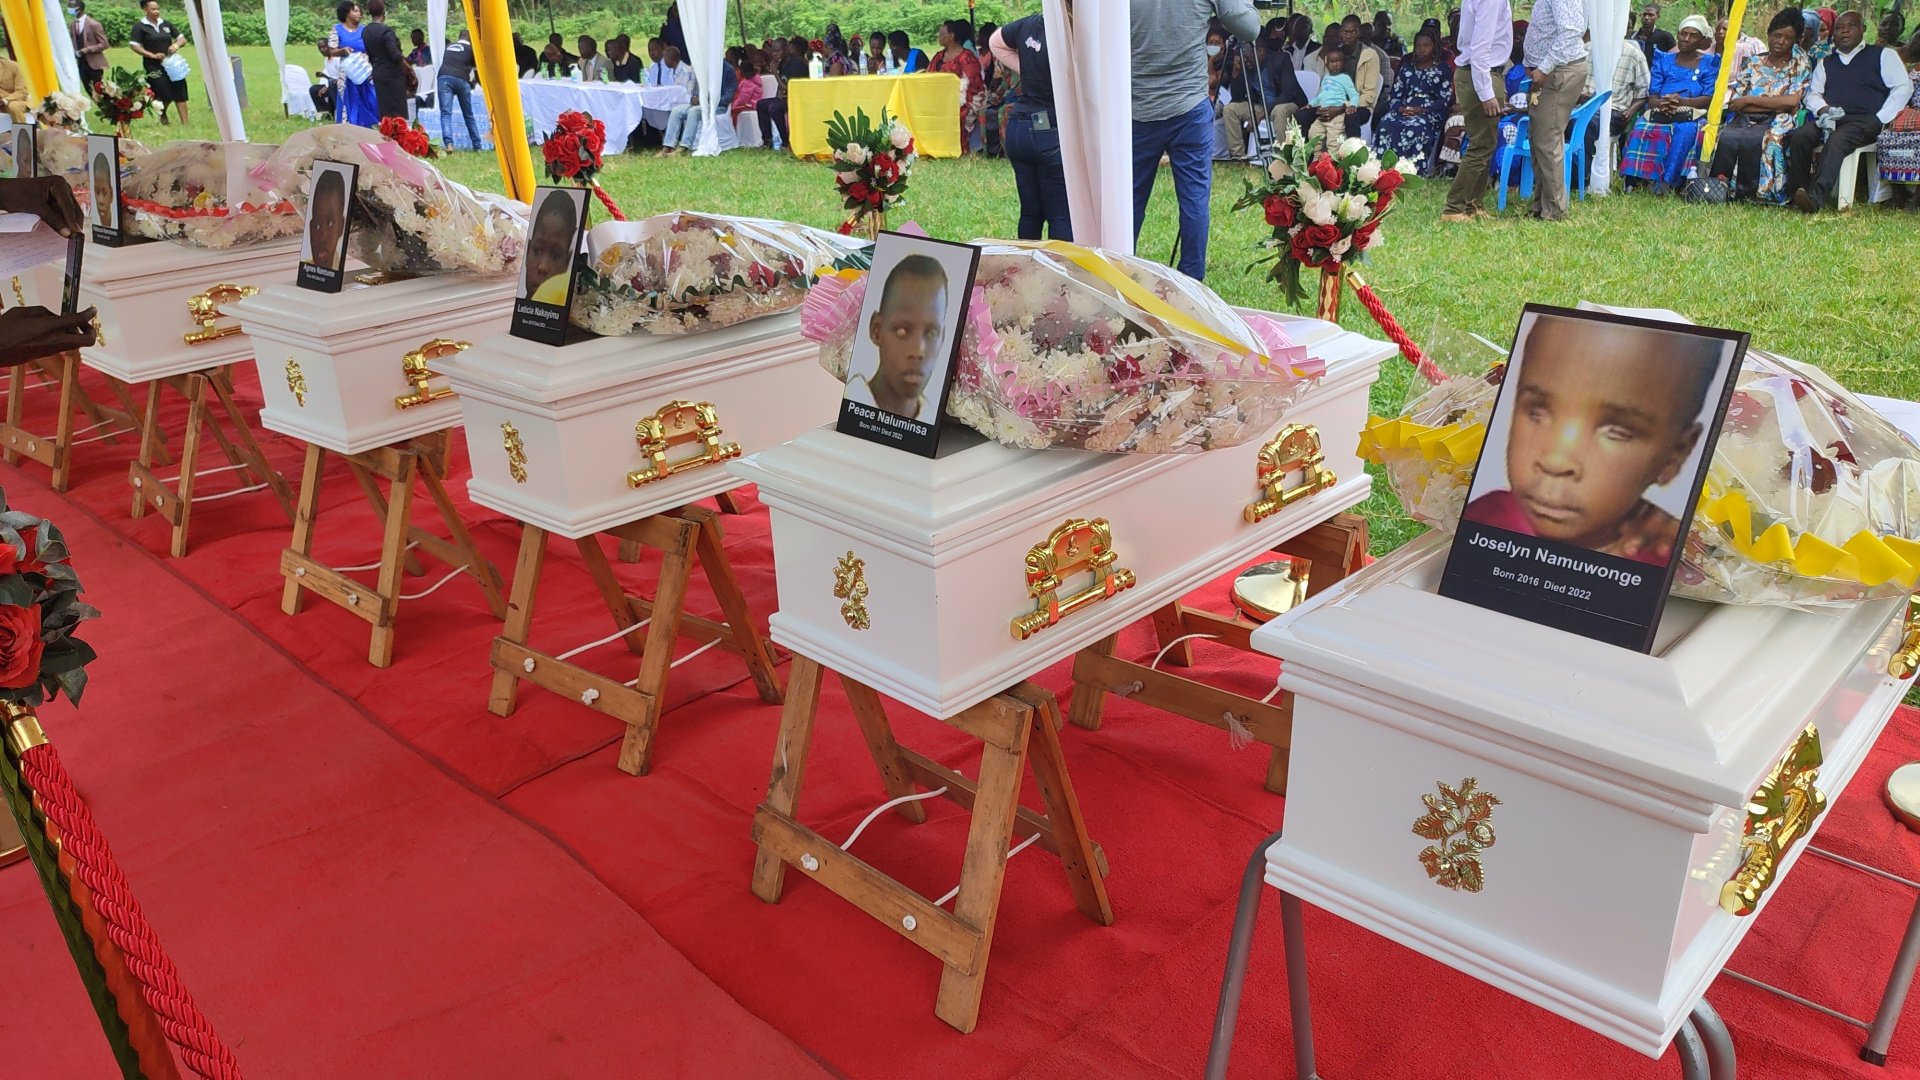 RIP! Sorrow as Remains of 11 Pupils burned in Mukono school of the Blind fire are Returned! 